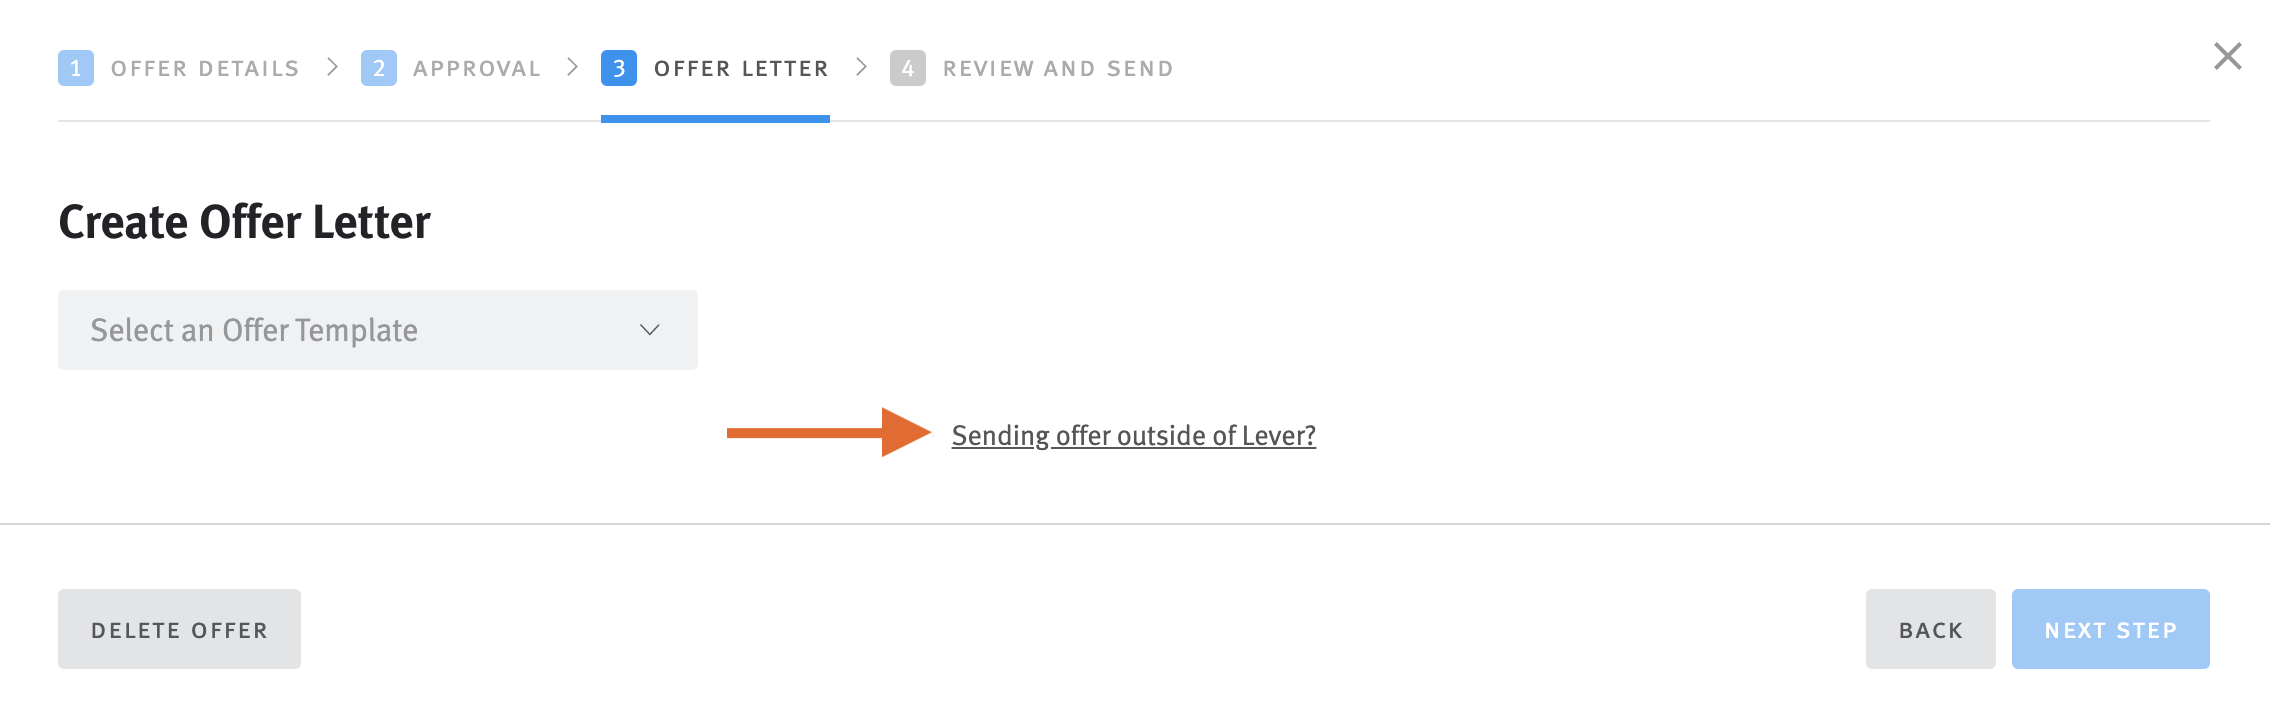 Arrow pointing to Sending offer outside of Lever link below offer letter template menu.